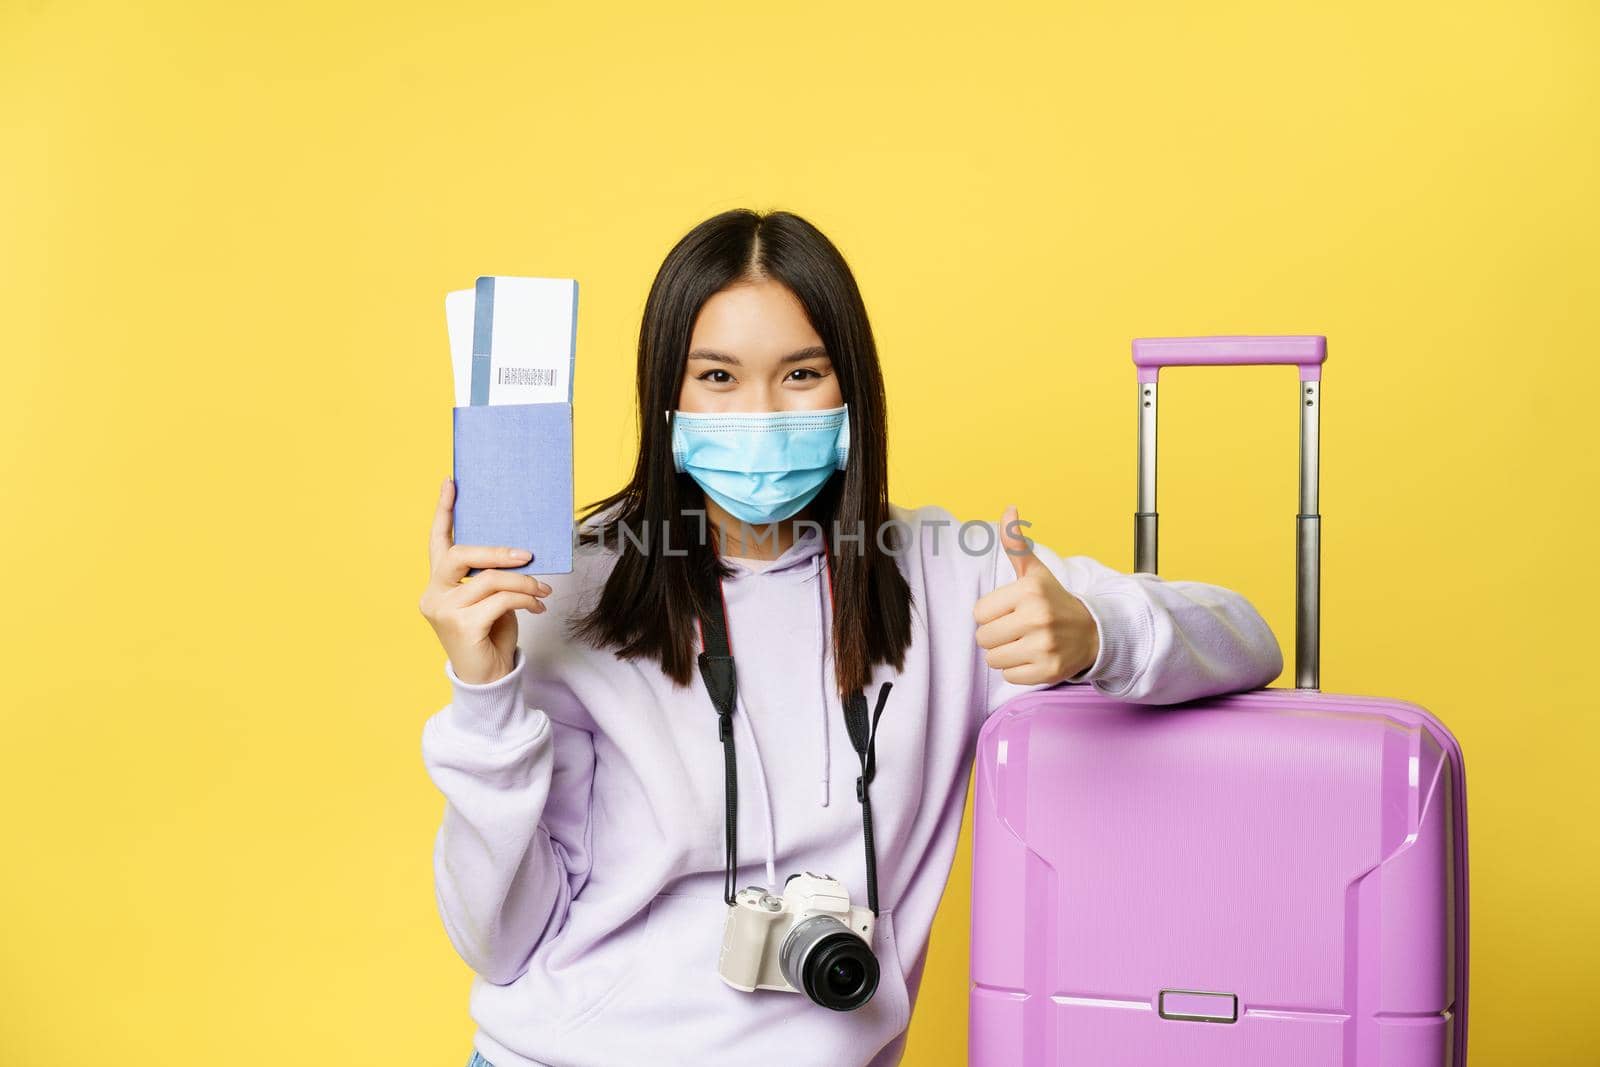 Japanese girl in medical mask, showing her passport and flight travel pass tickets, thumbs up, posing with suitcase, going on vacation, yellow background.